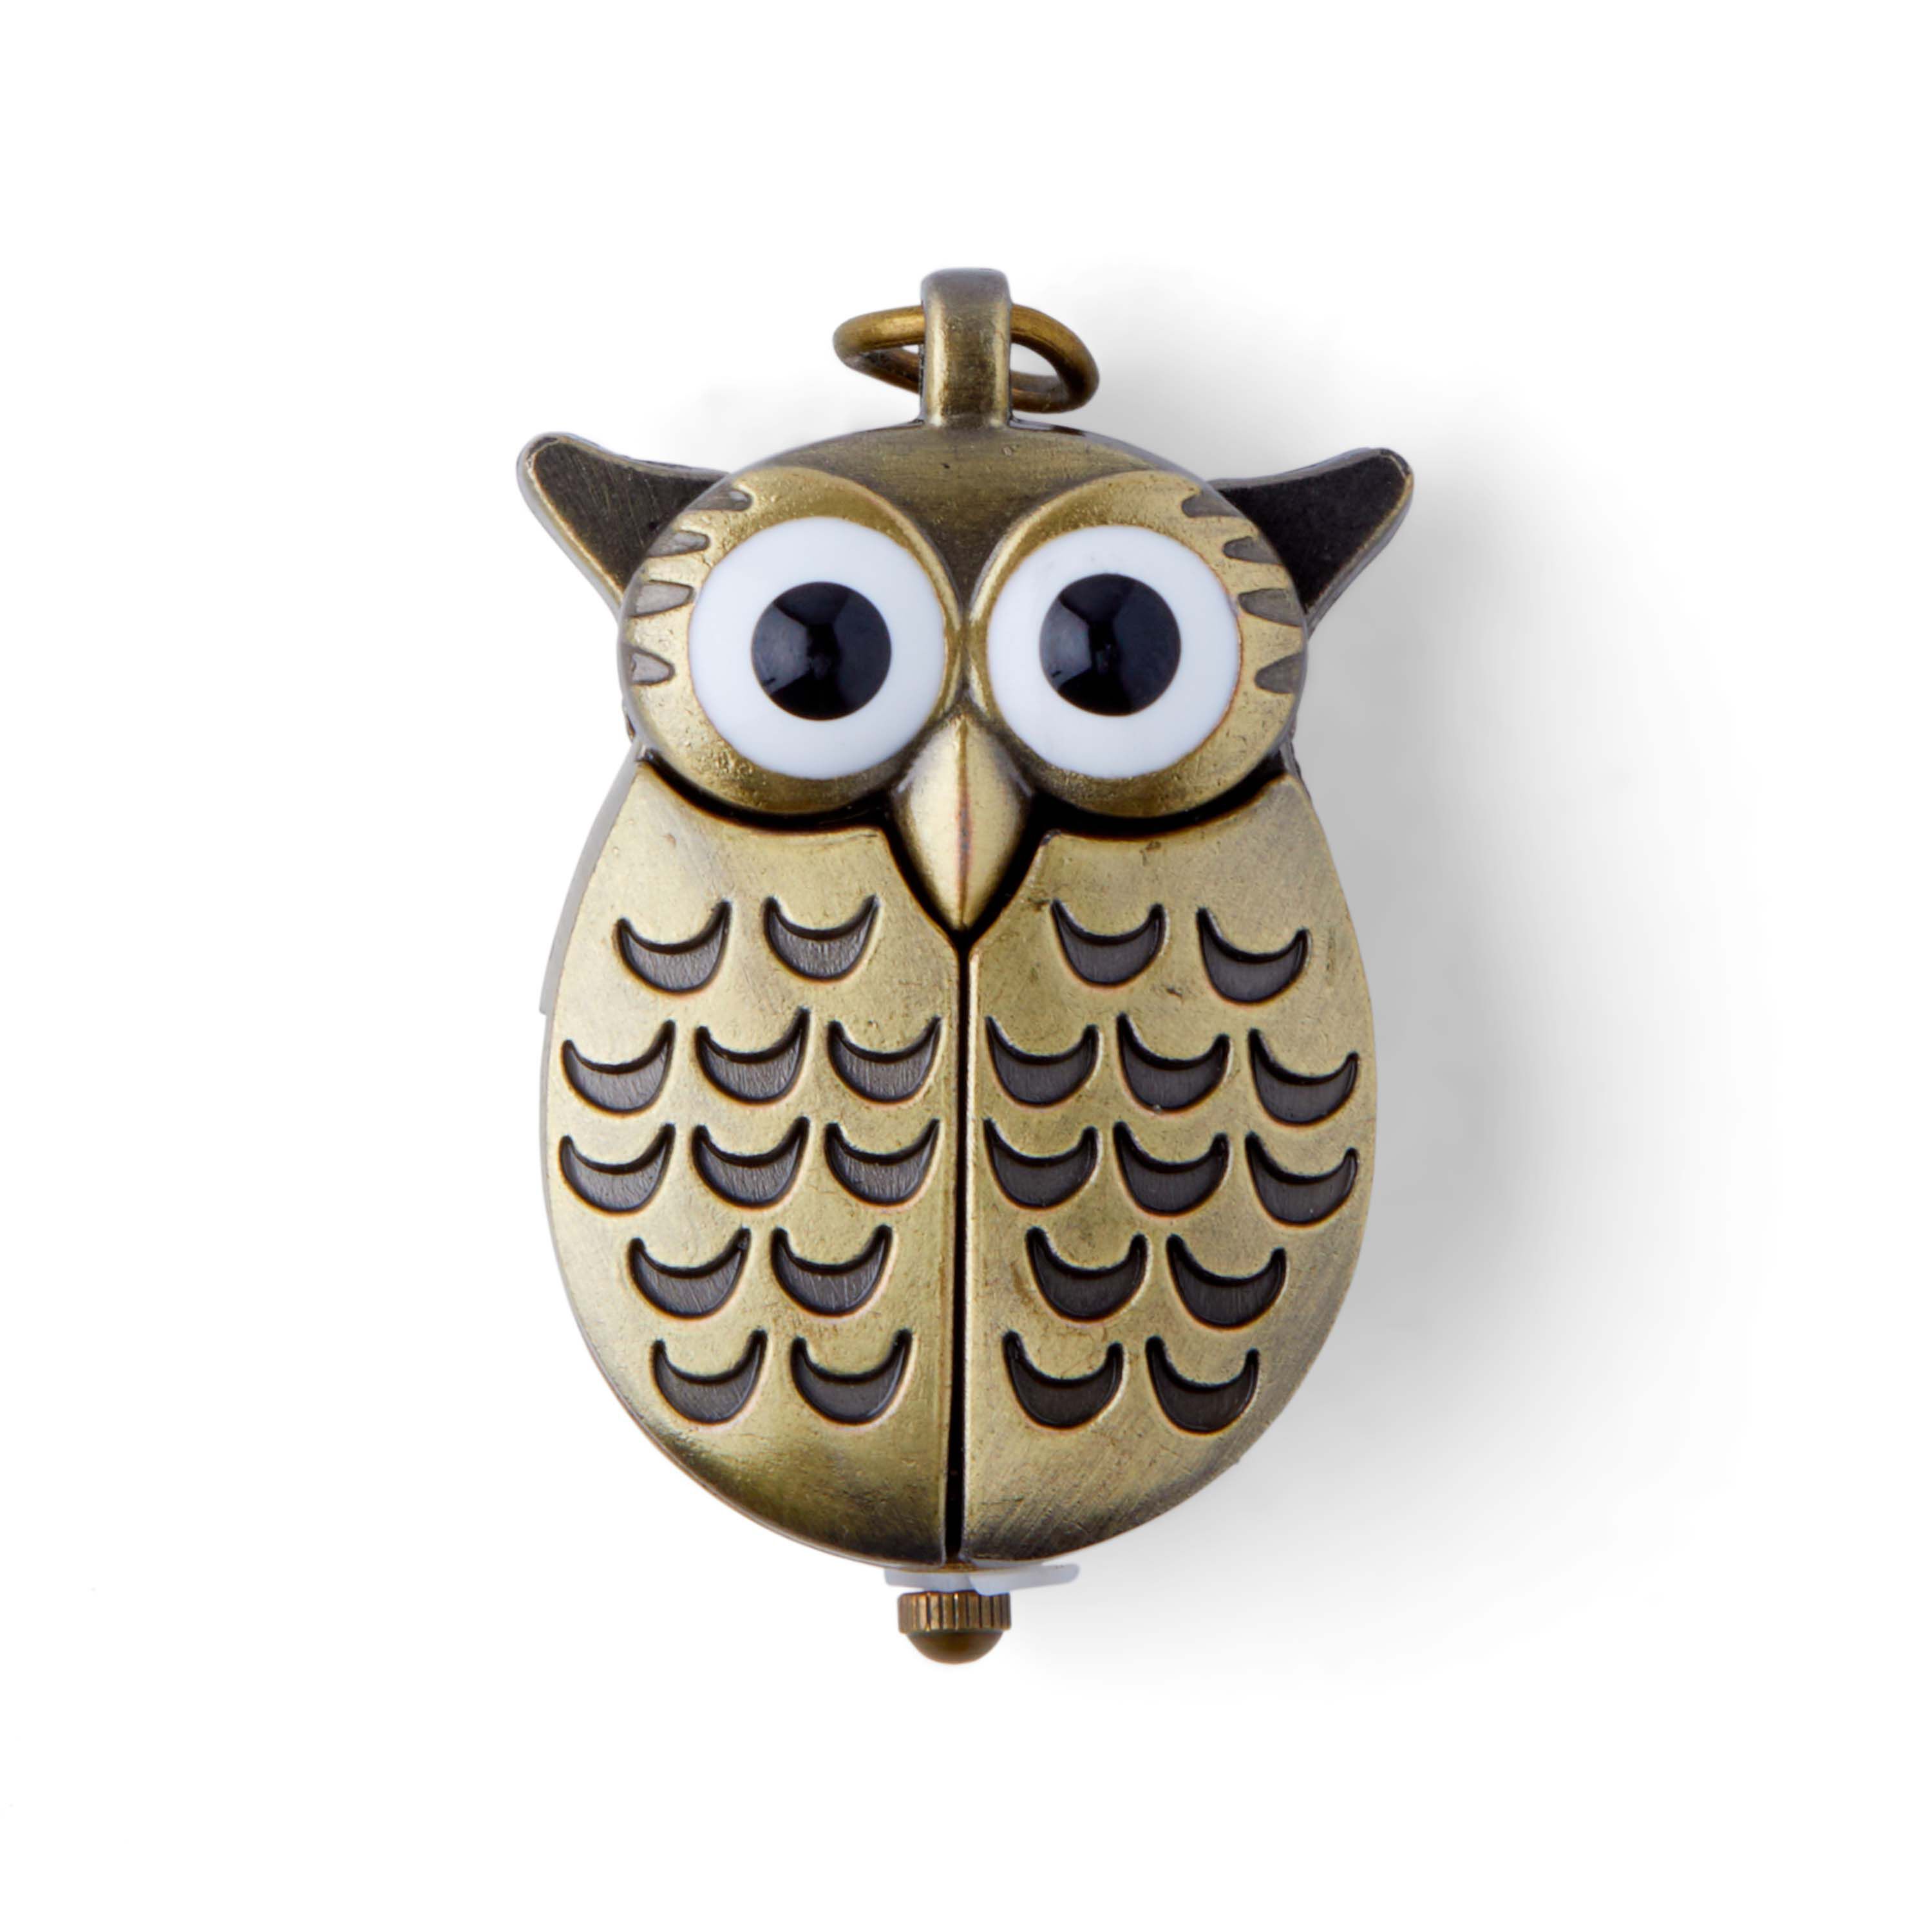 24x7 eMall owl Pocket Watch Classic Vintage Retro Antique Owl Chain Pocket  2.5 Cms Diameter Pendent (Owl) : Amazon.in: Bags, Wallets and Luggage